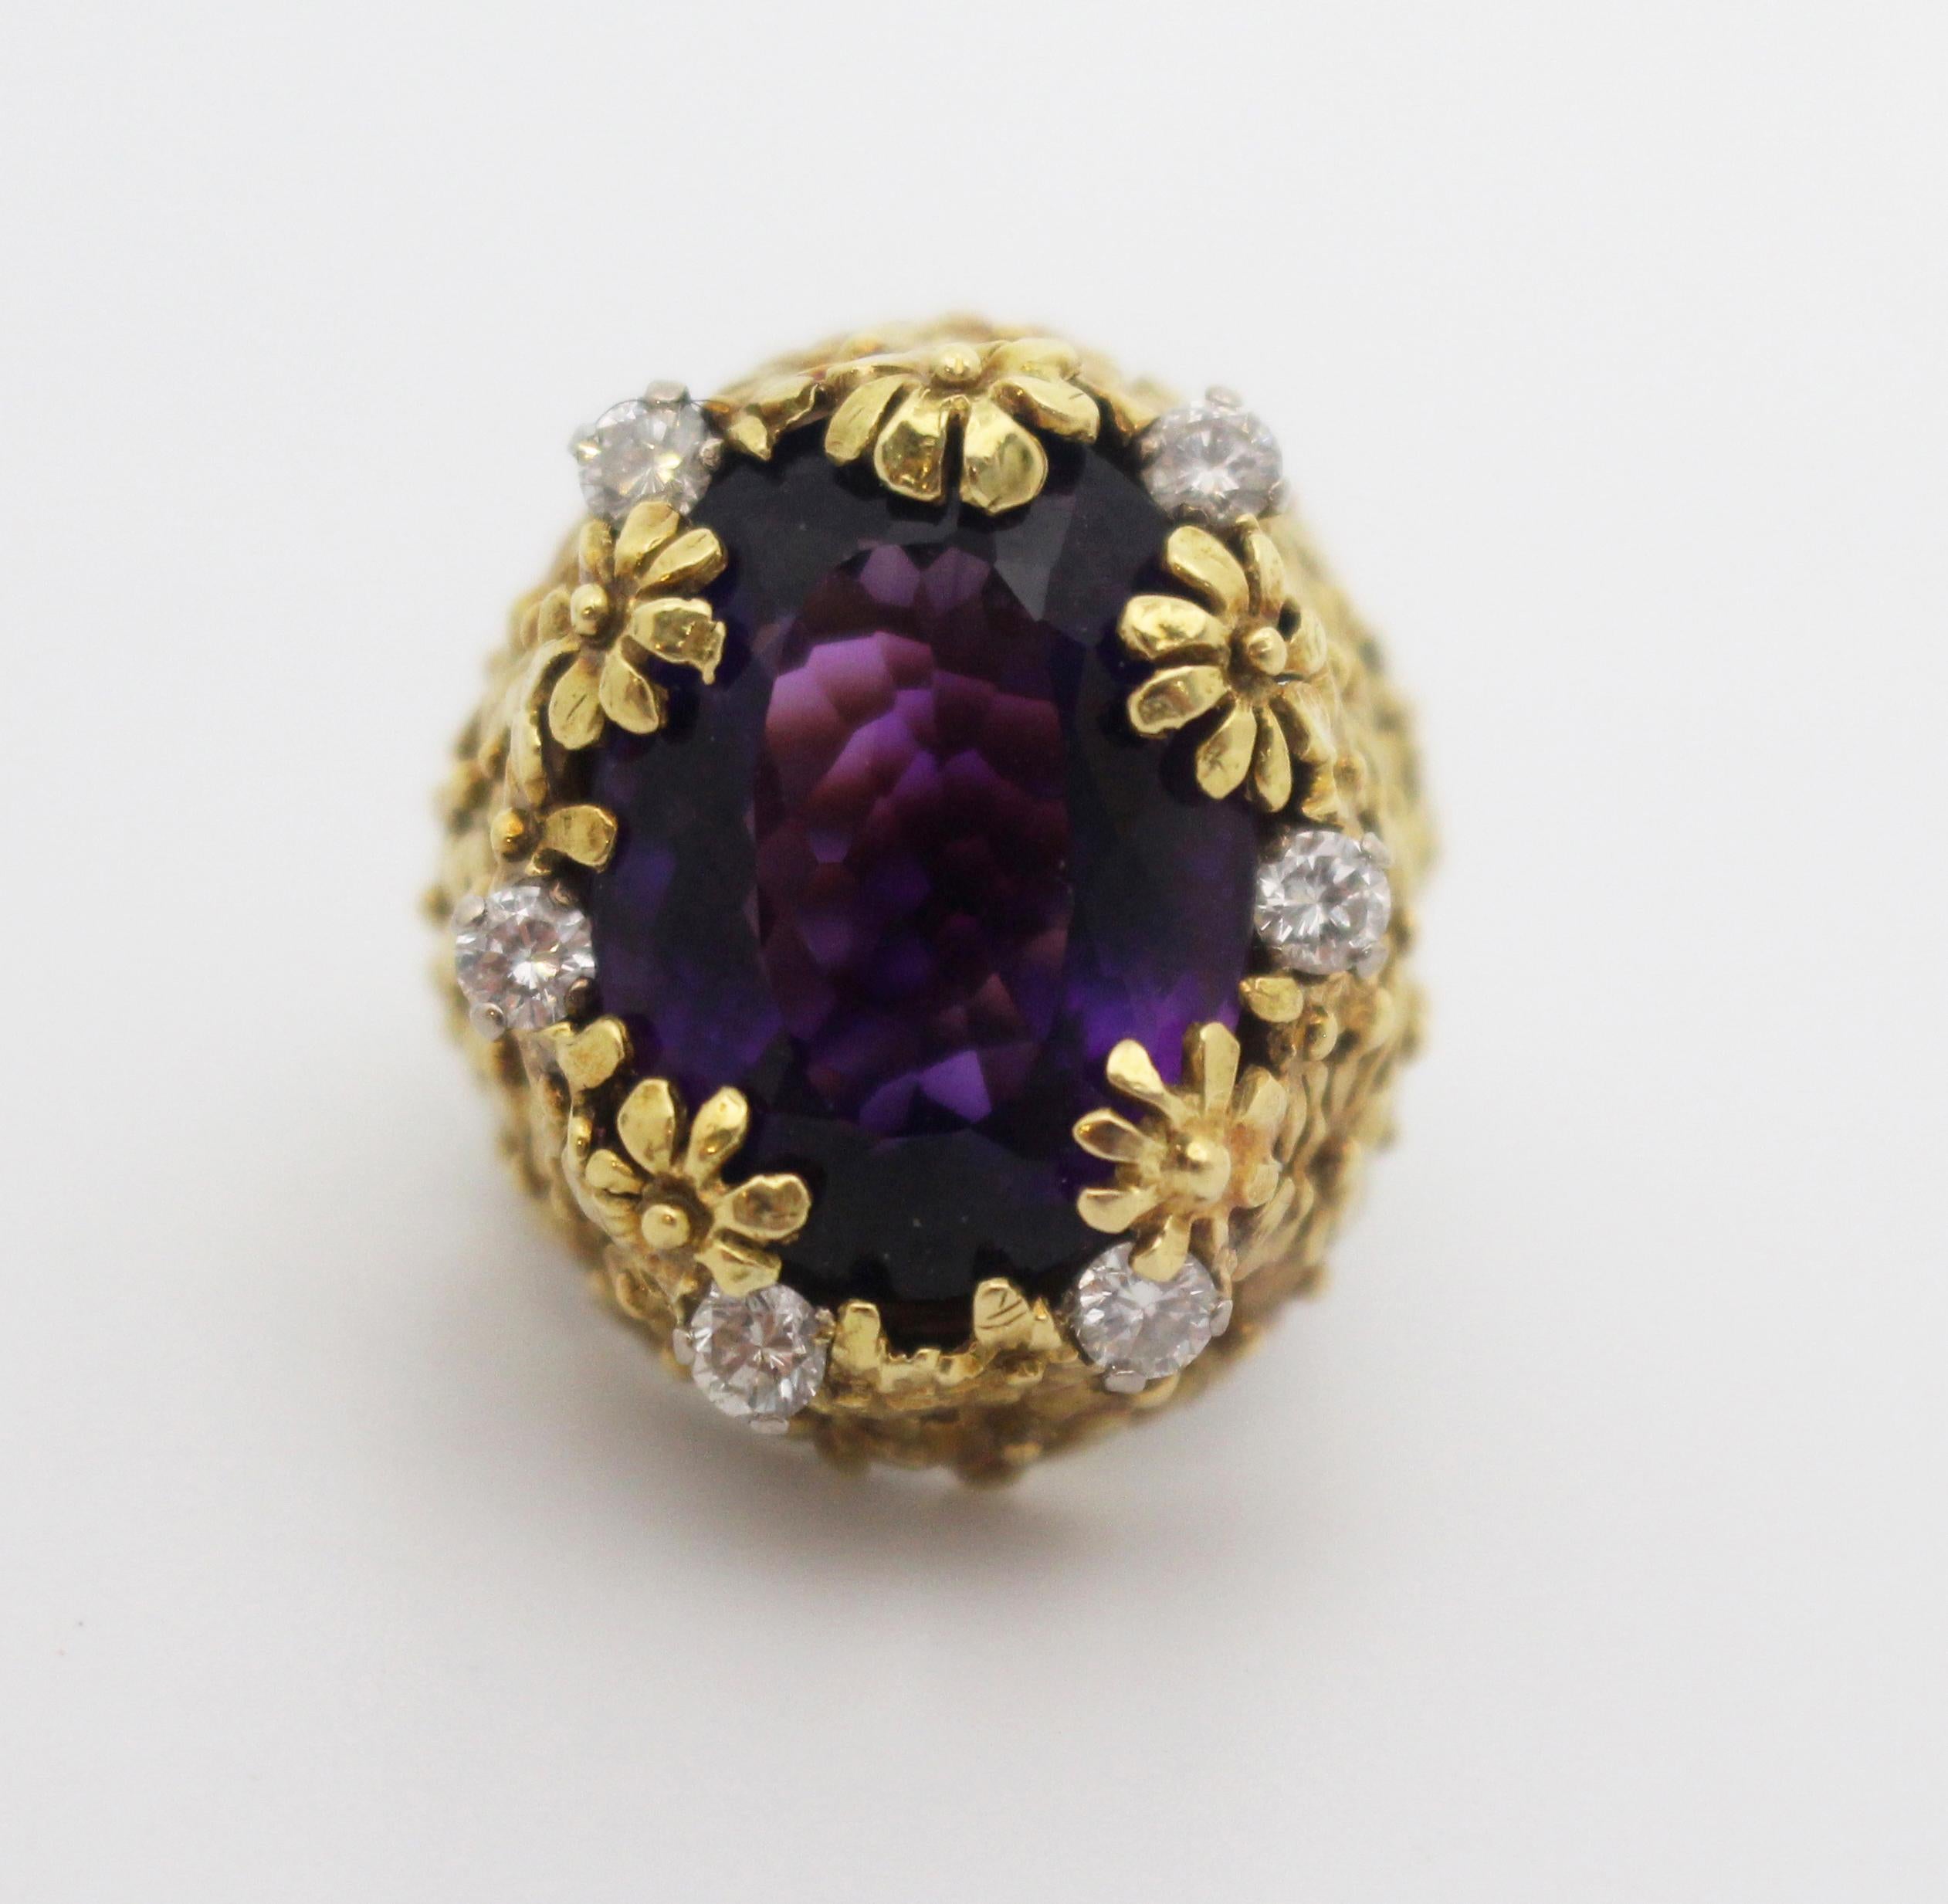 Amethyst & diamond fancy openwork flower ring


Centring on an oval shaped mixed cut amethyst. Weight 15.75 carat, deep purplish mauve in colour, minimal inclusions

Six four claw set round brilliant cut diamonds. Total diamond weight 0.66